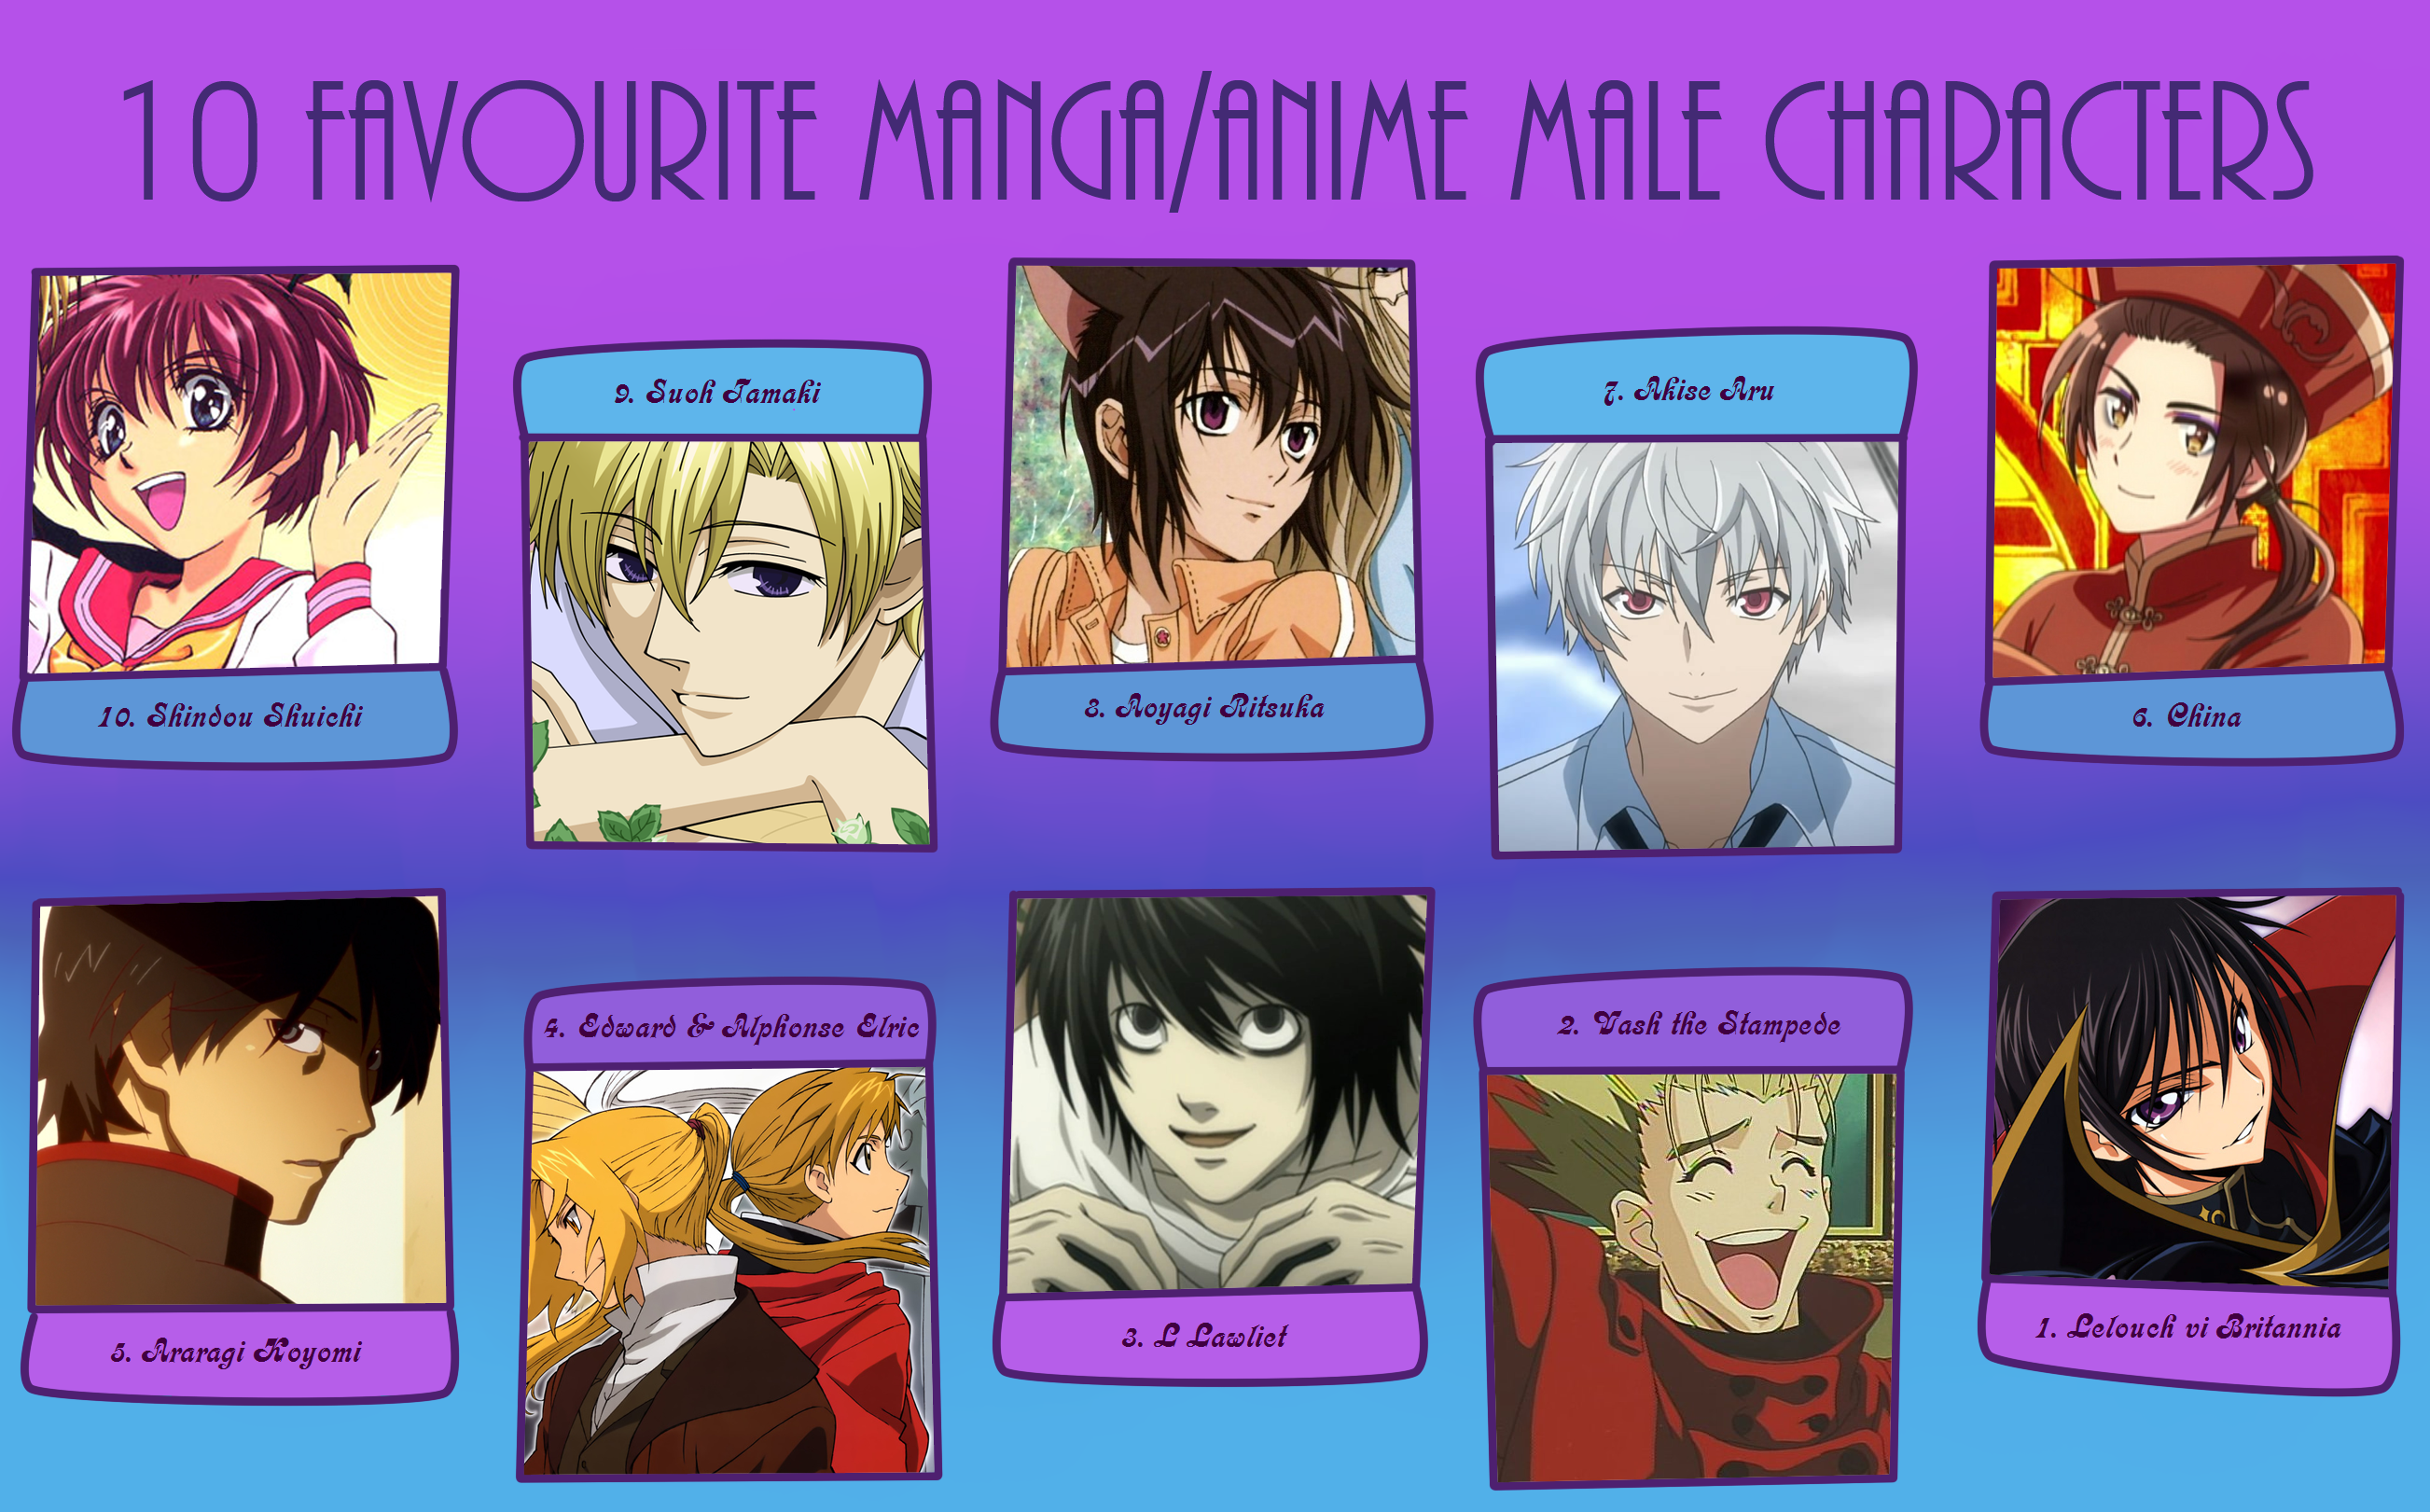 My Top 10 Favorite Male Anime/Manga Characters by ...